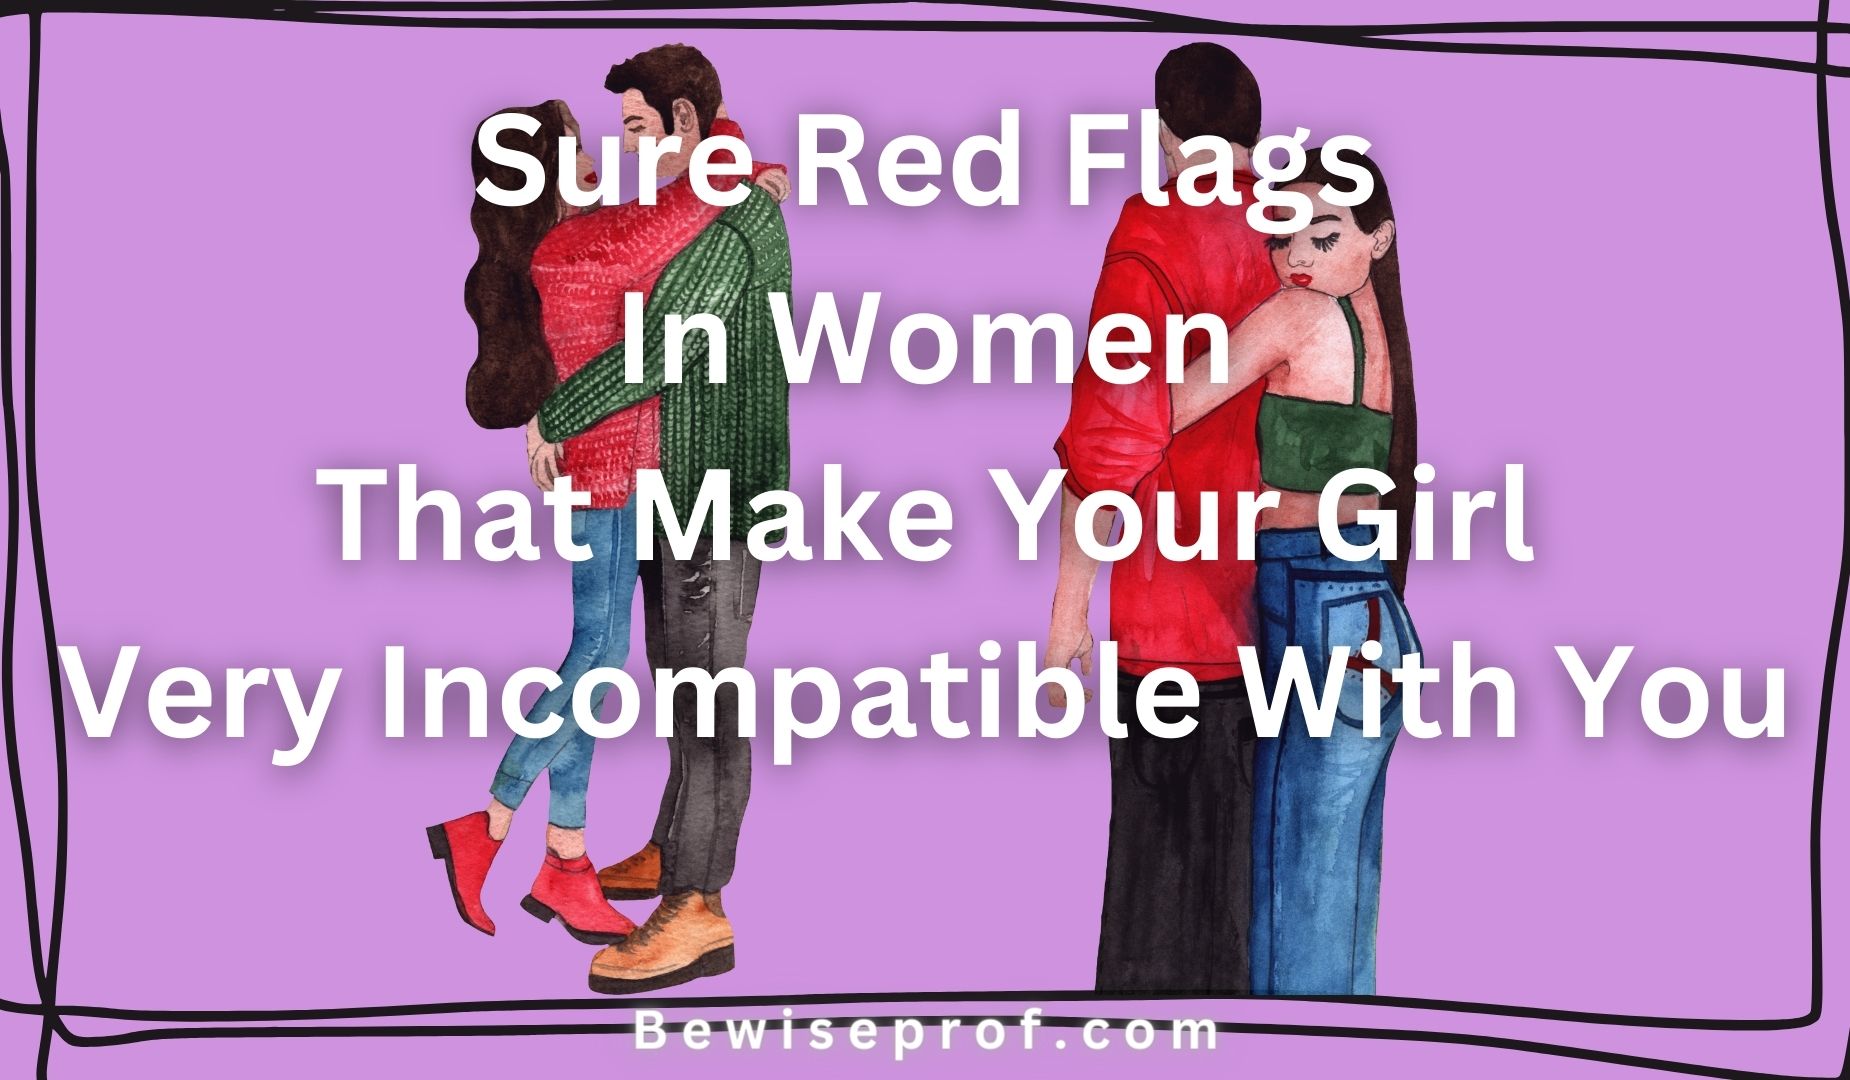 Sure Red Flags In Women That Make Your Girl Very Incompatible With You